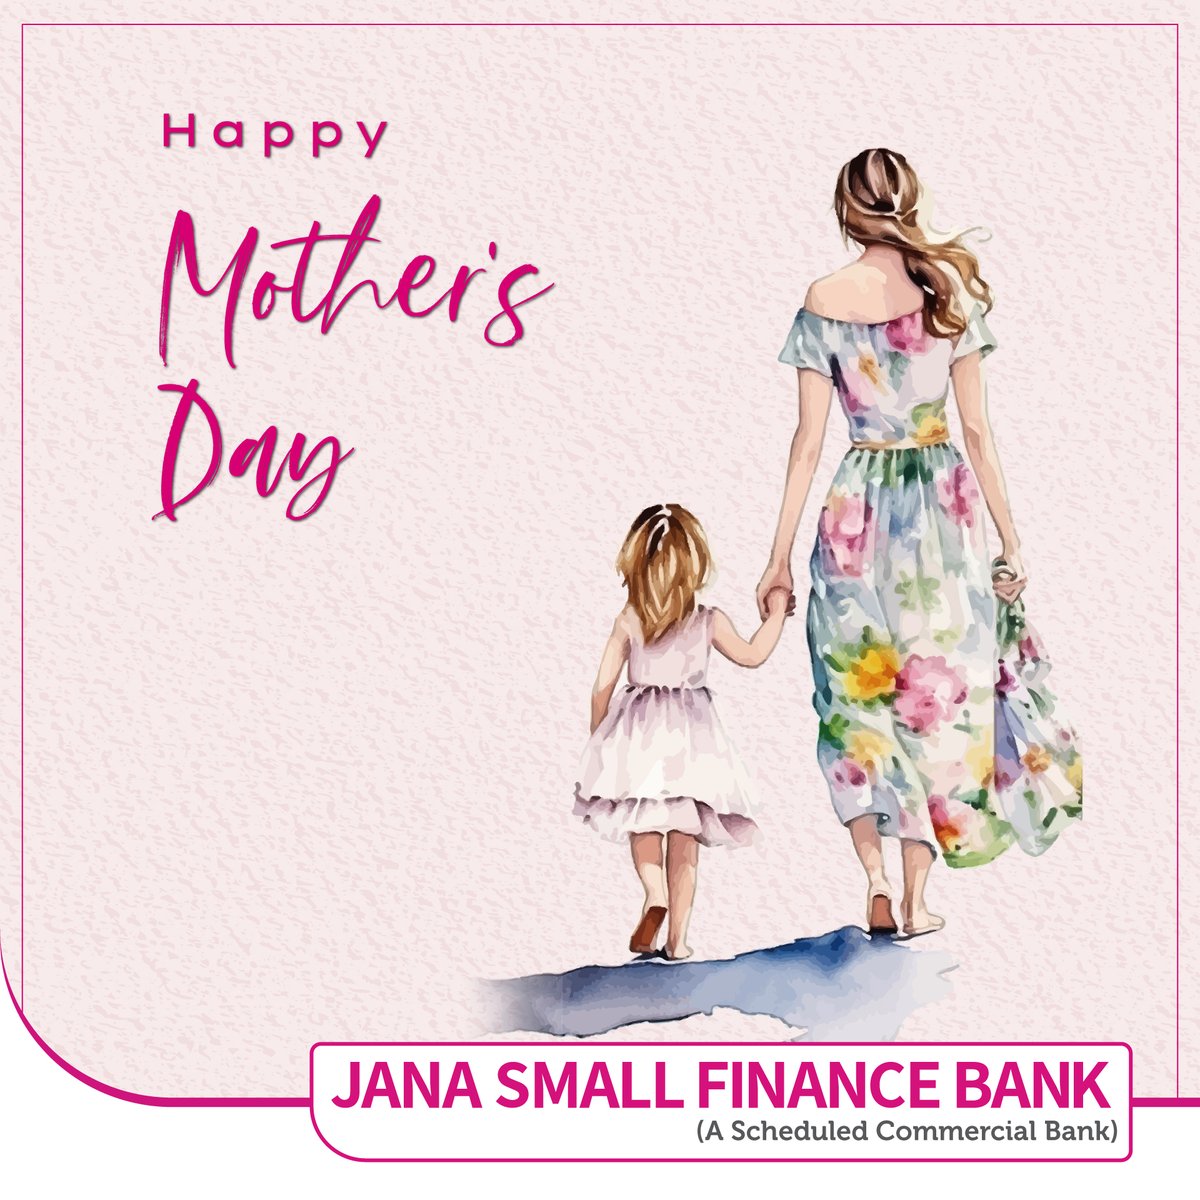 Wishing the ones who go above and beyond for us, a very.  #HappyMothersDay #janasmallfinancebank